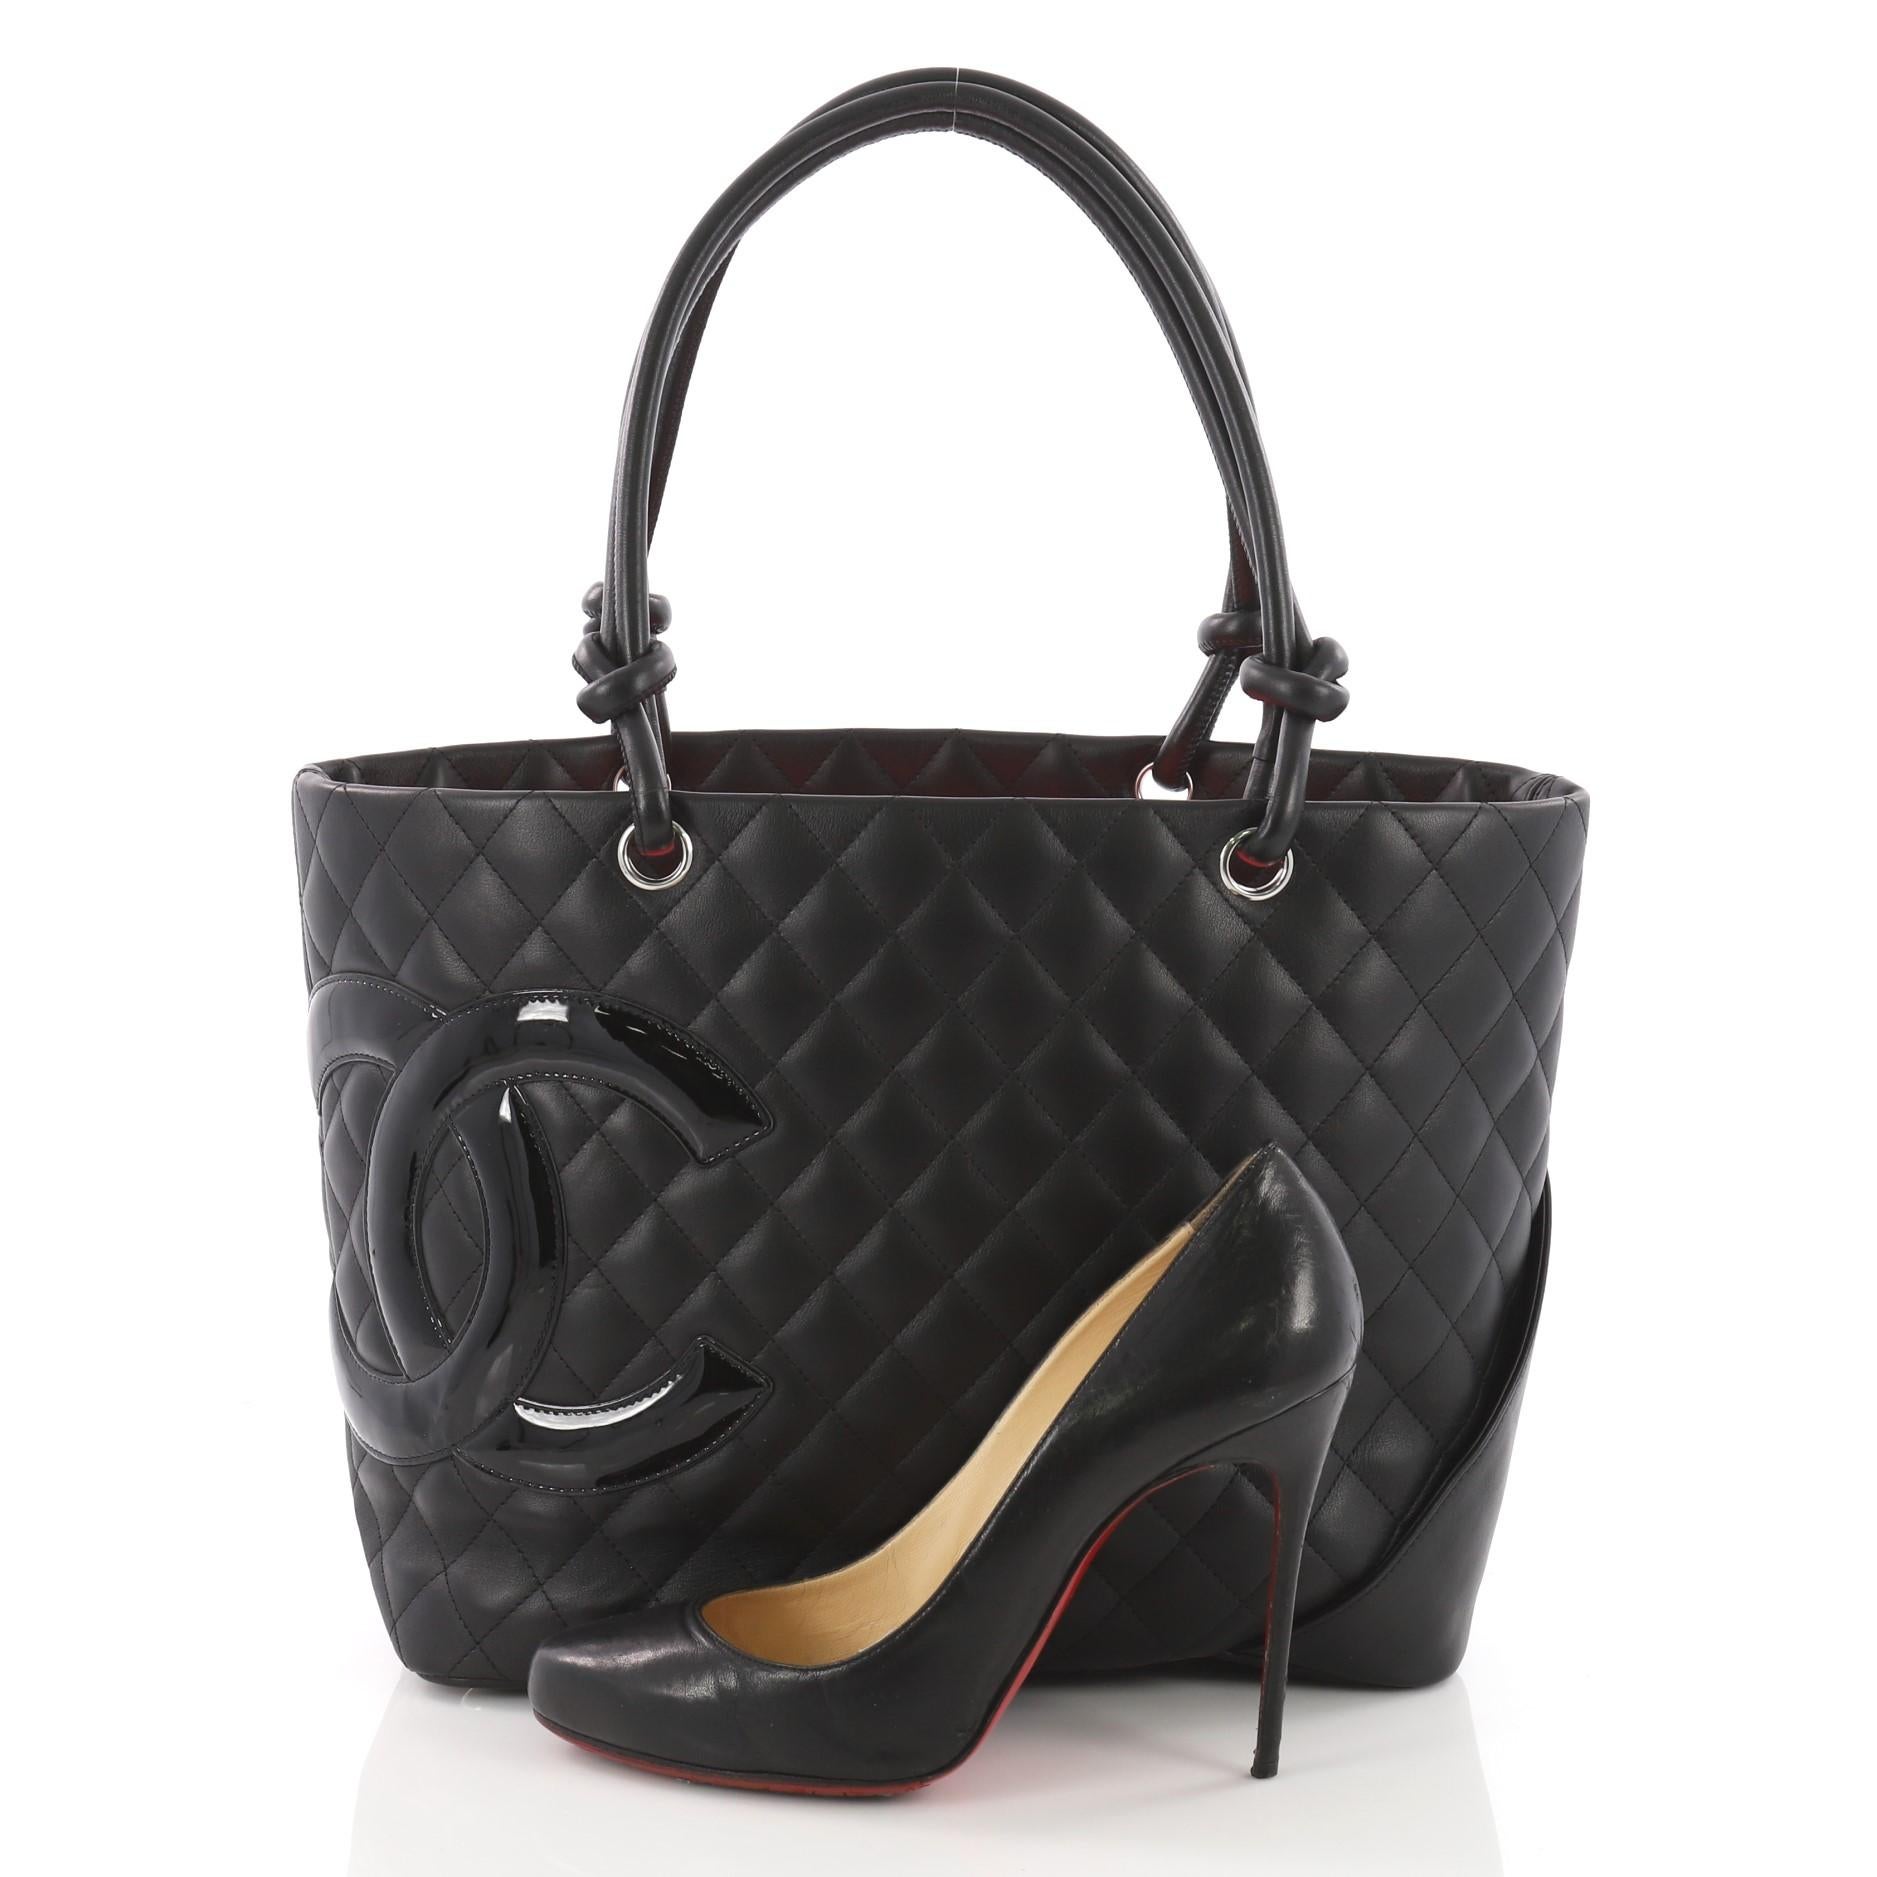 This authentic Chanel Cambon Tote Quilted Leather Large is a finely crafted bag from the brand's Cambon Collection. Designed from black diamond quilted leather, this tote displays a large black patent leather interlocking CC side logo, dual-rolled